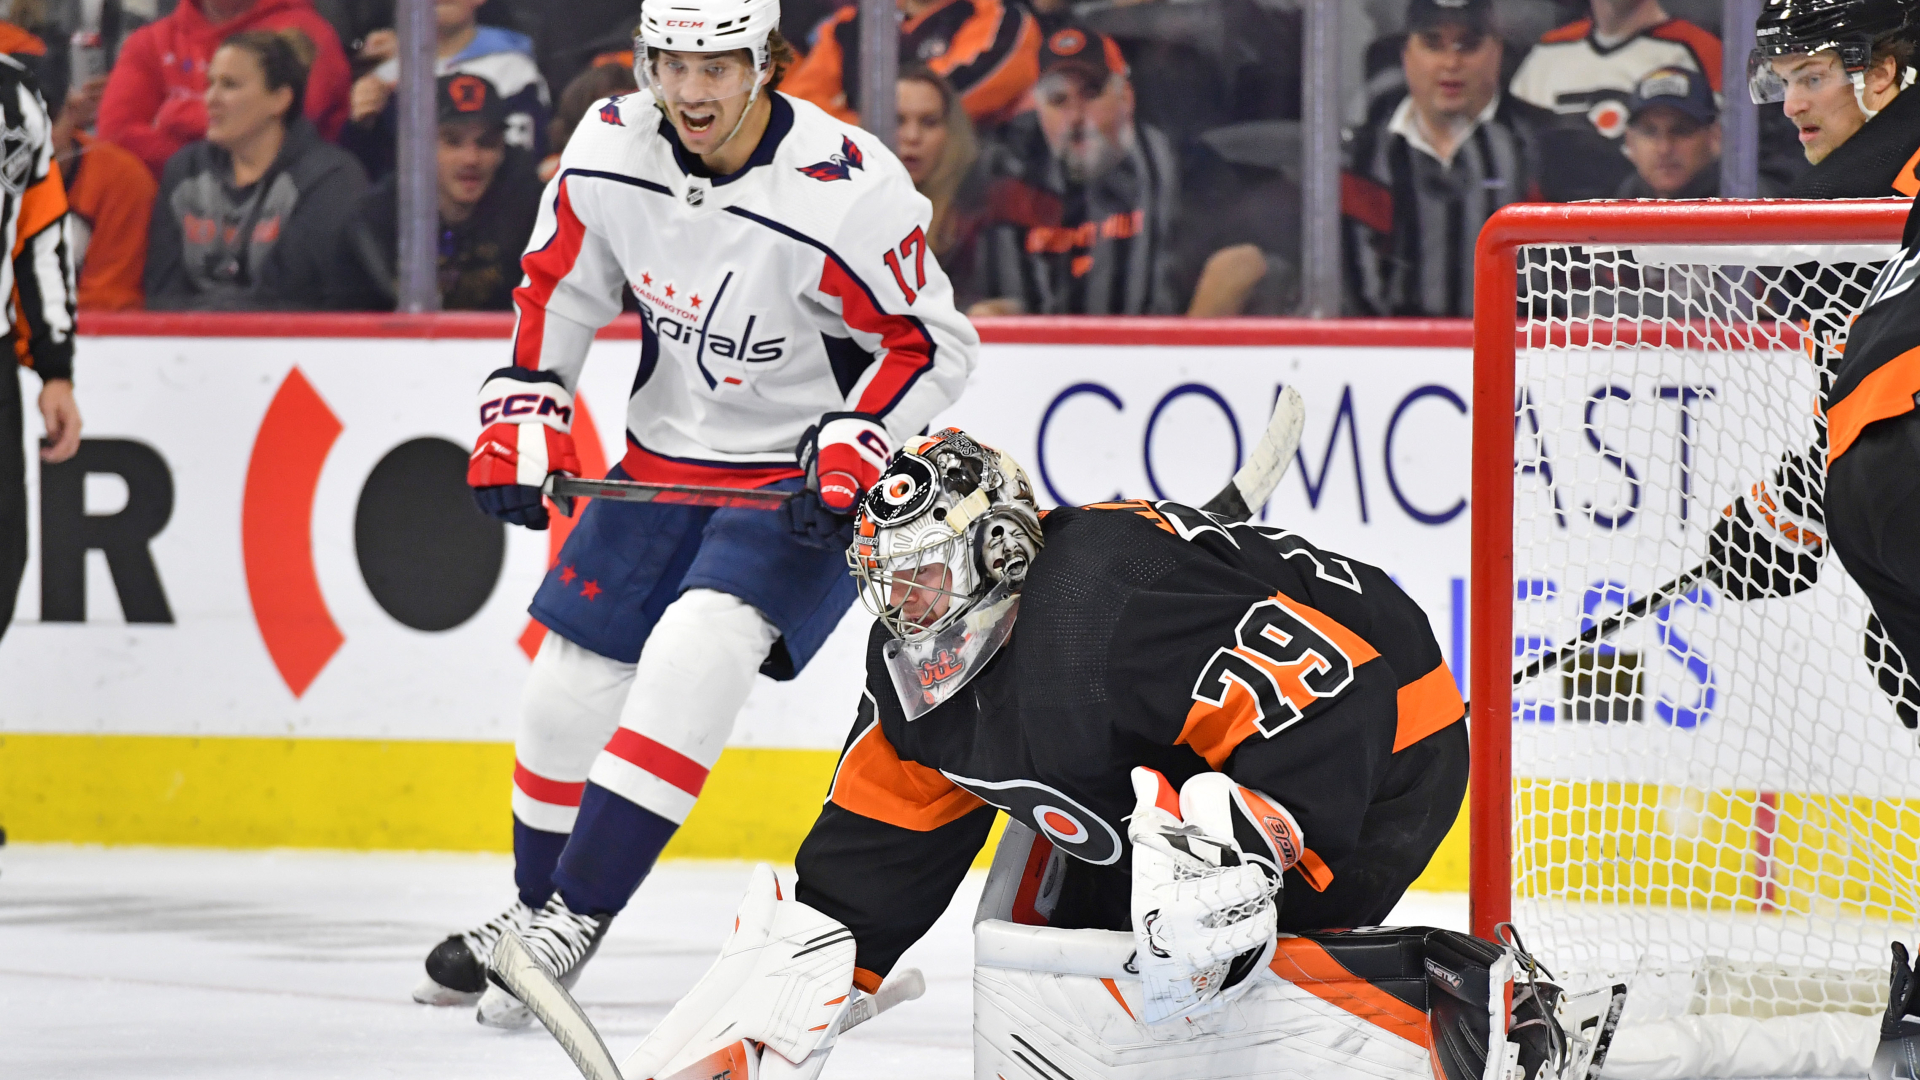 Flyers goaltender Carter Hart and Capitals center Dylan Strome eye the puck during the first period at Wells Fargo Center